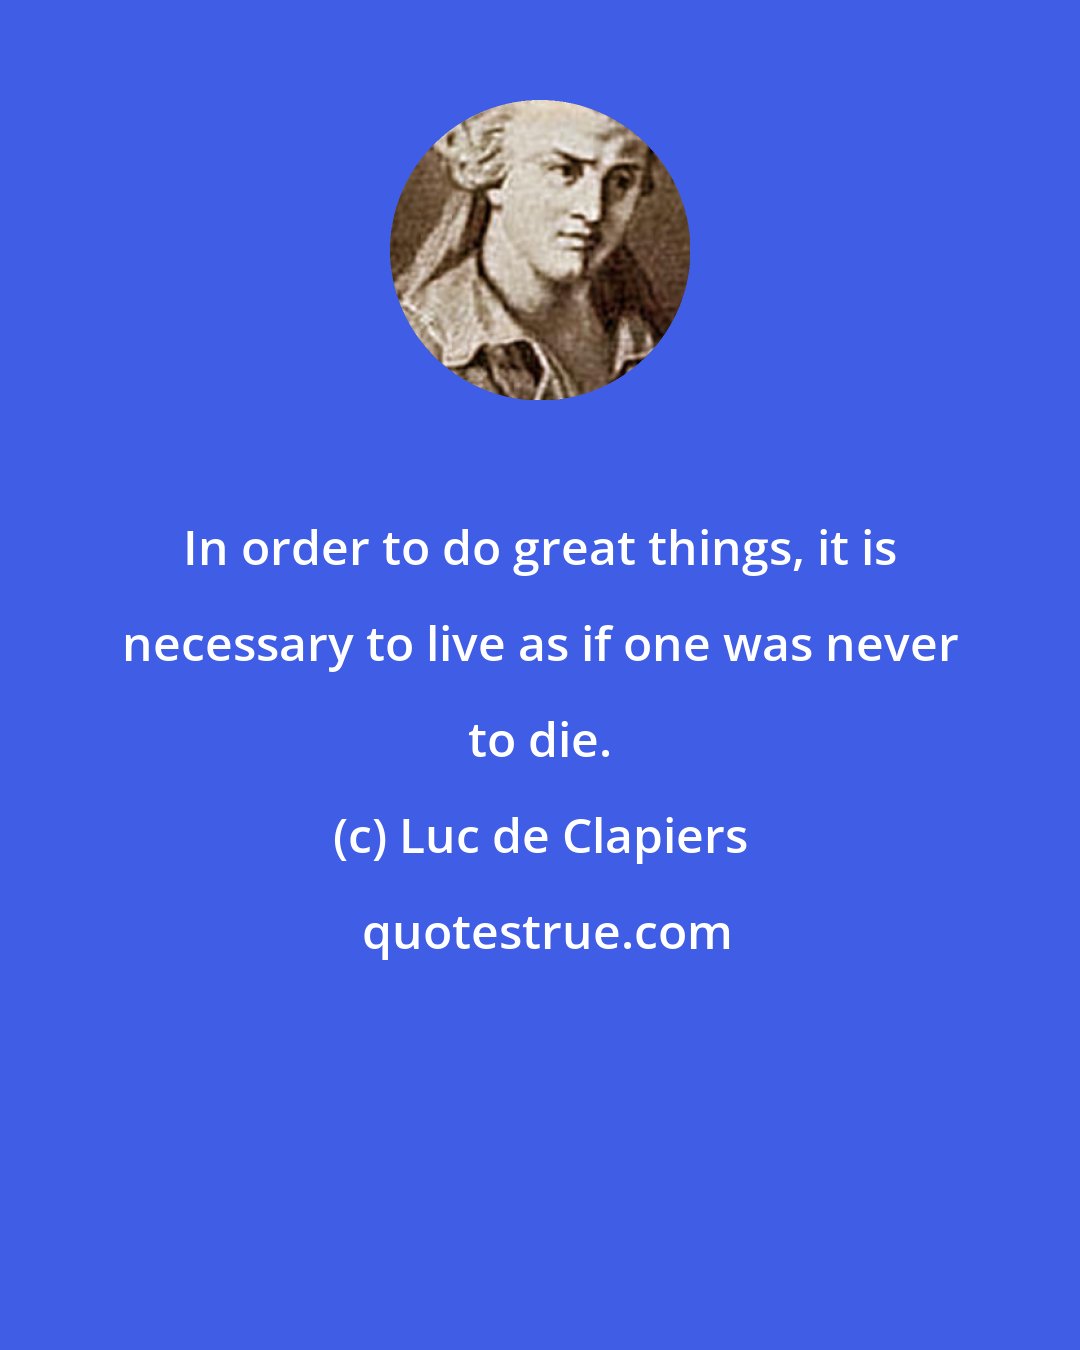 Luc de Clapiers: In order to do great things, it is necessary to live as if one was never to die.